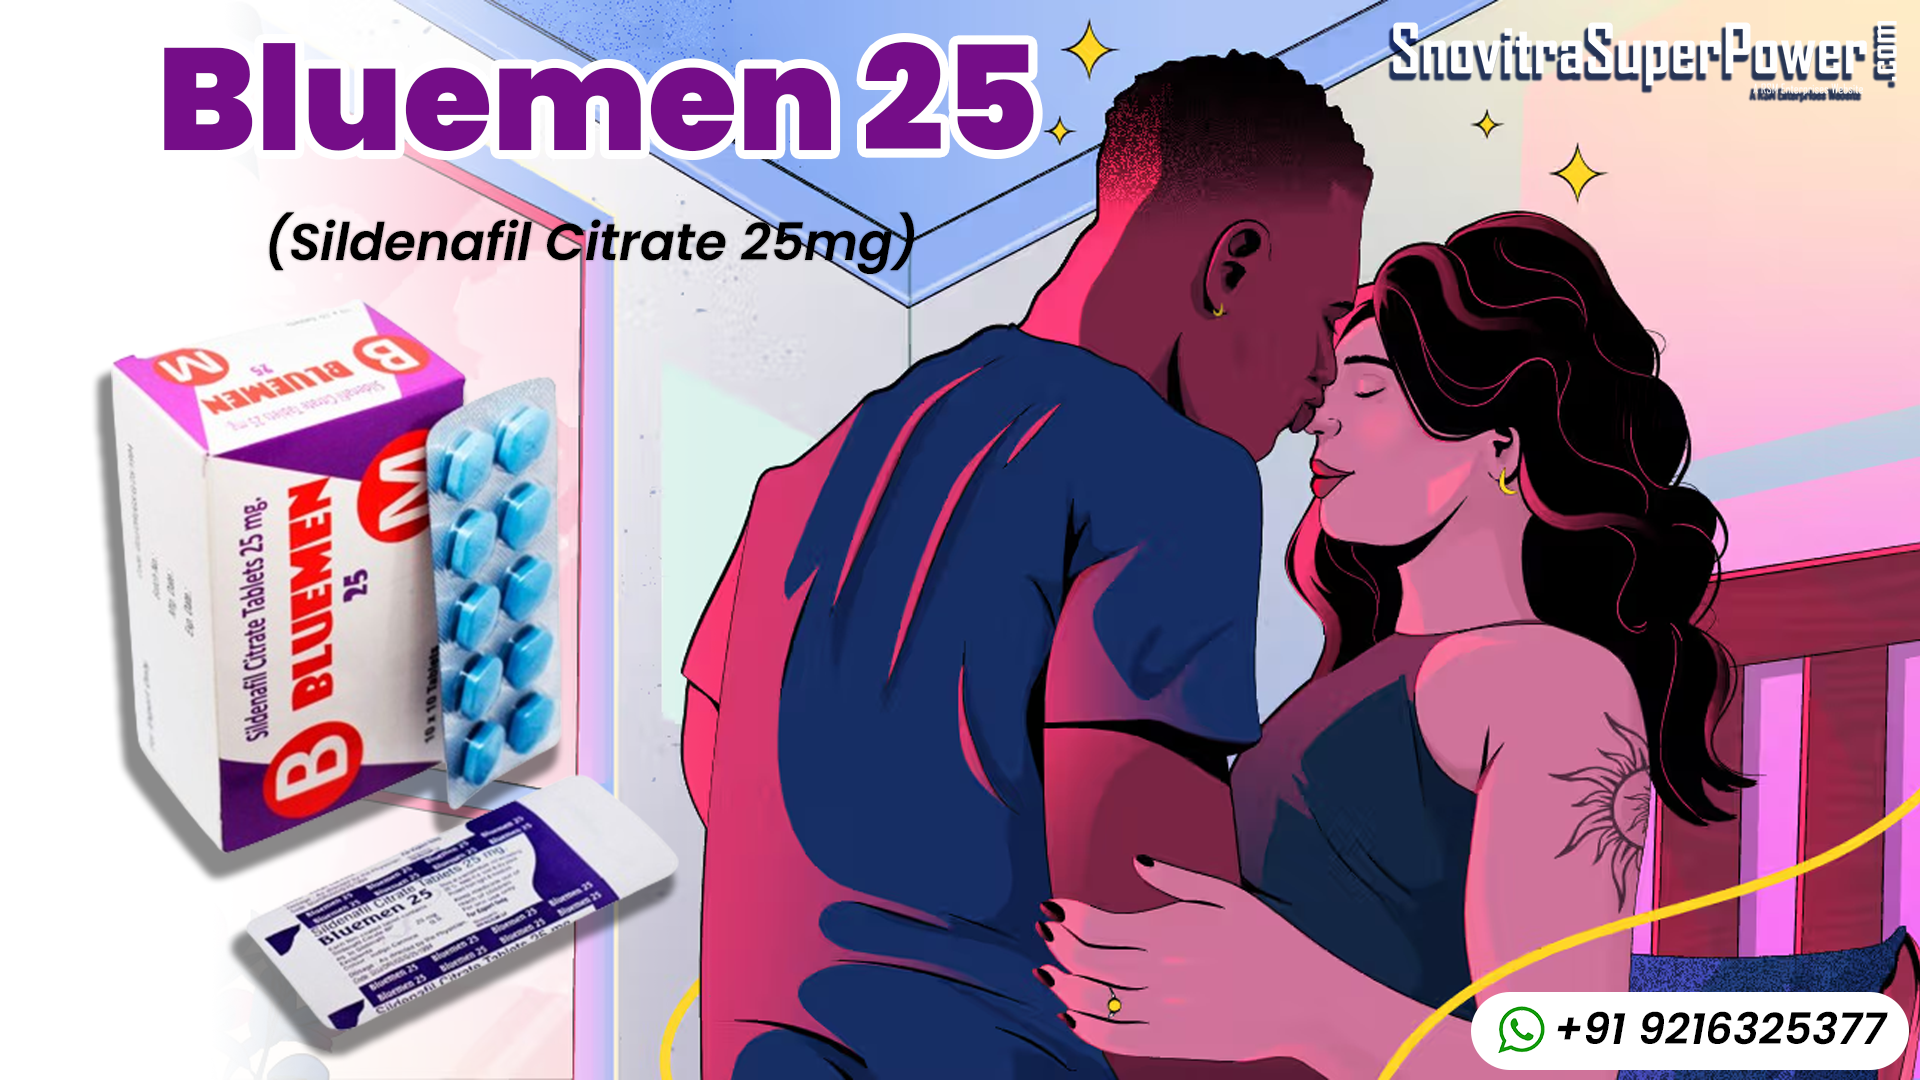 Bluemen 25: An Influential Medication to Remedy Erection Failure